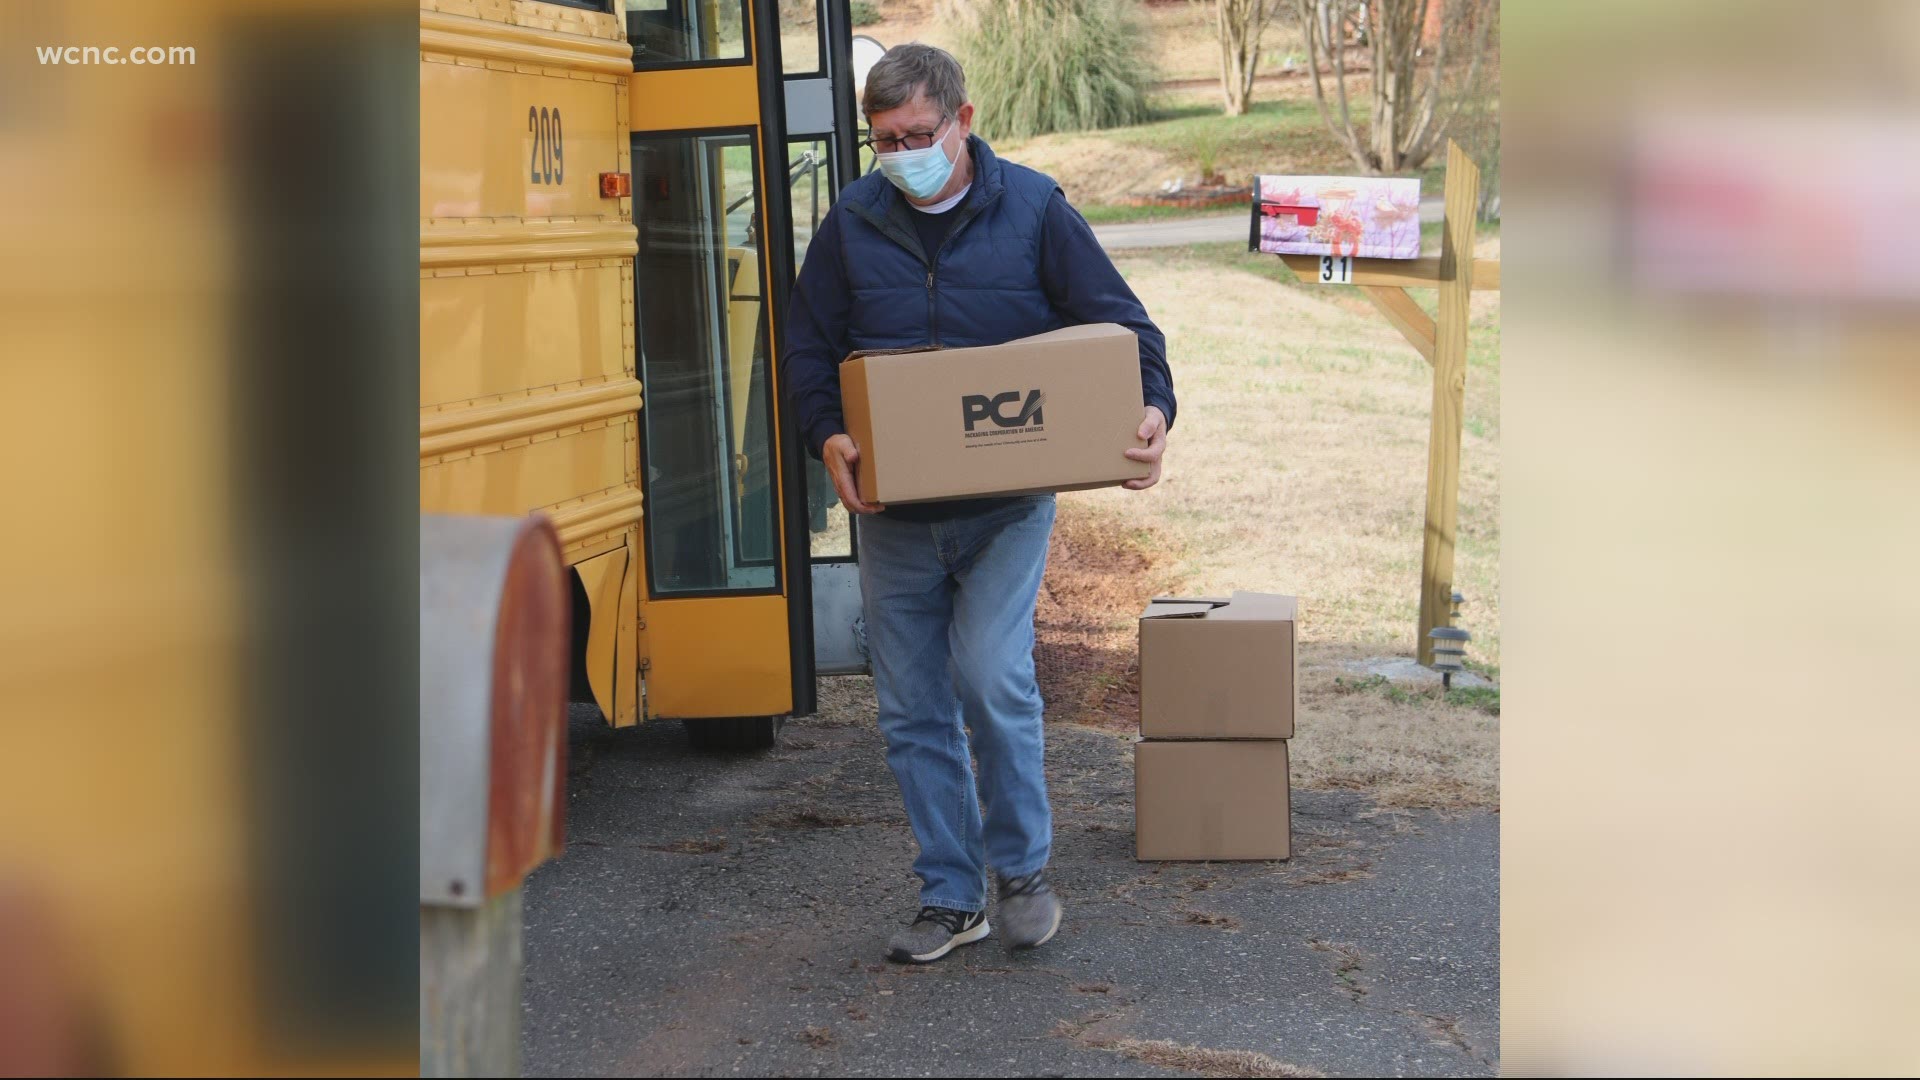 The bus drivers have been delivering food to homes for students. Drivers have been able to feed more than 700 students.